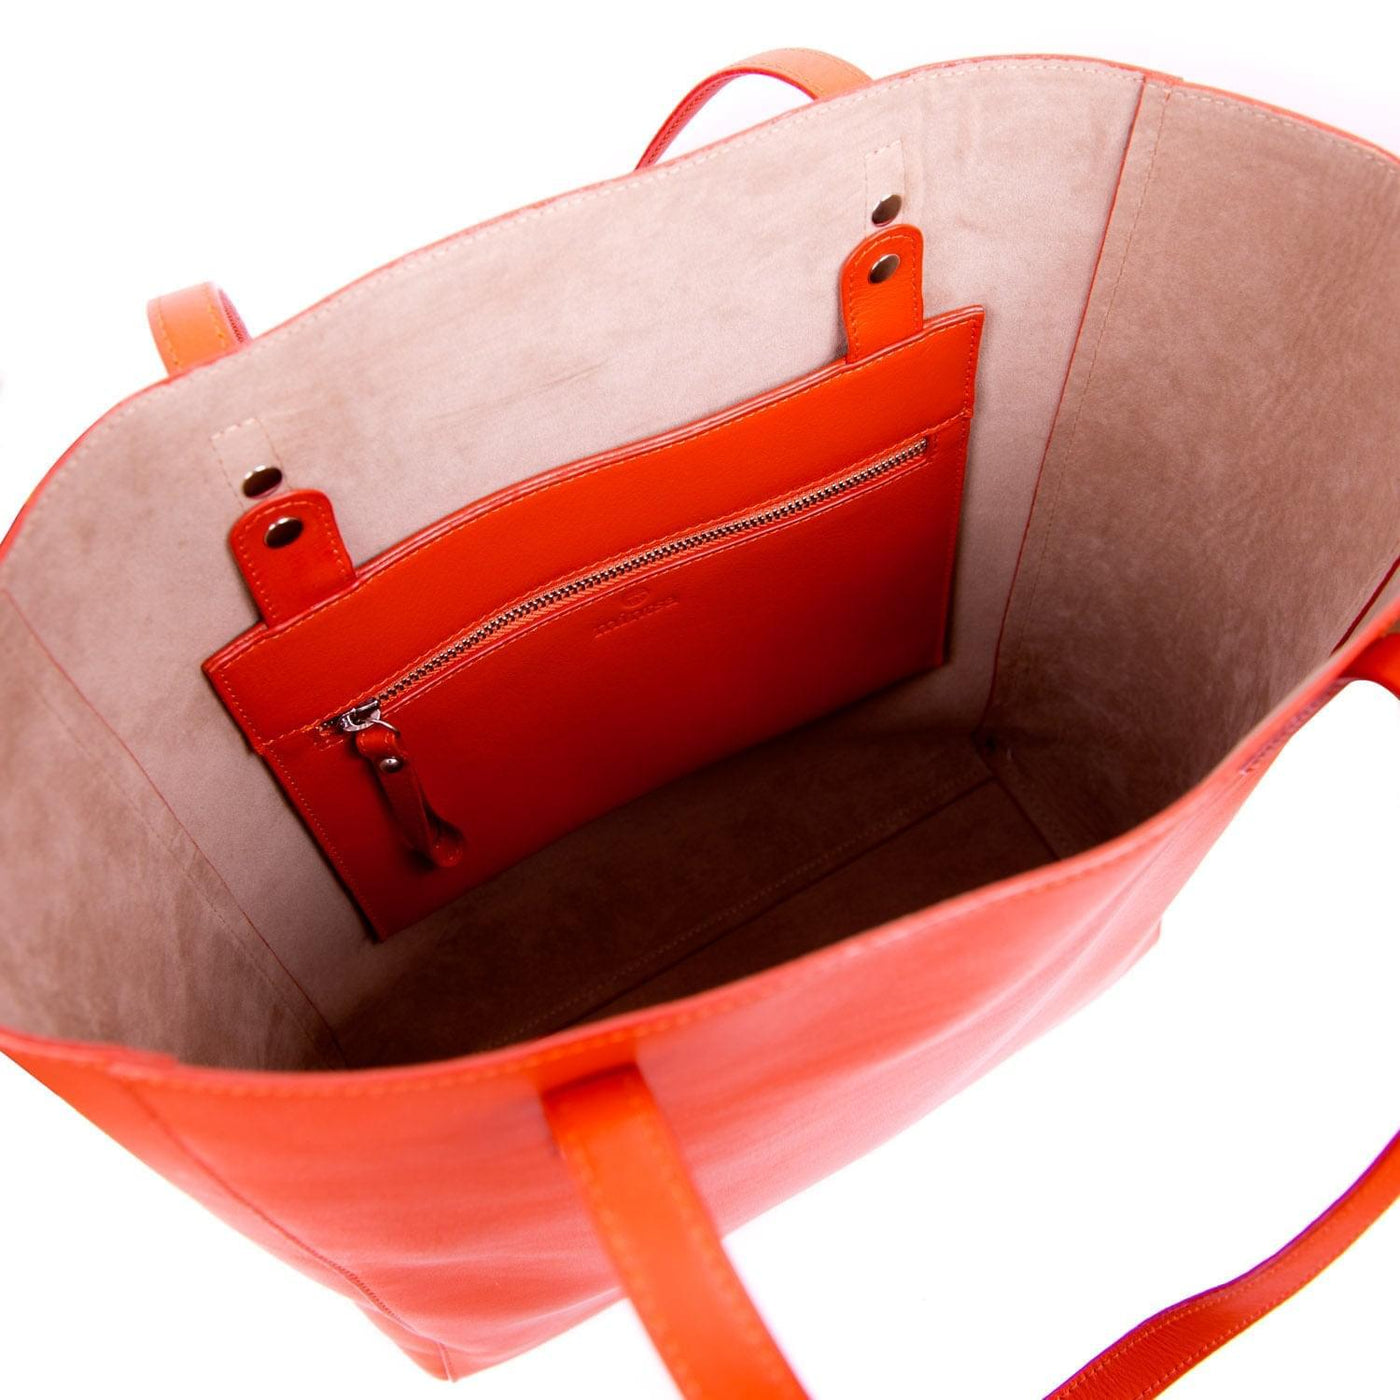 Grab n Go Tangerine Tote - Women's tote bag for everyday use